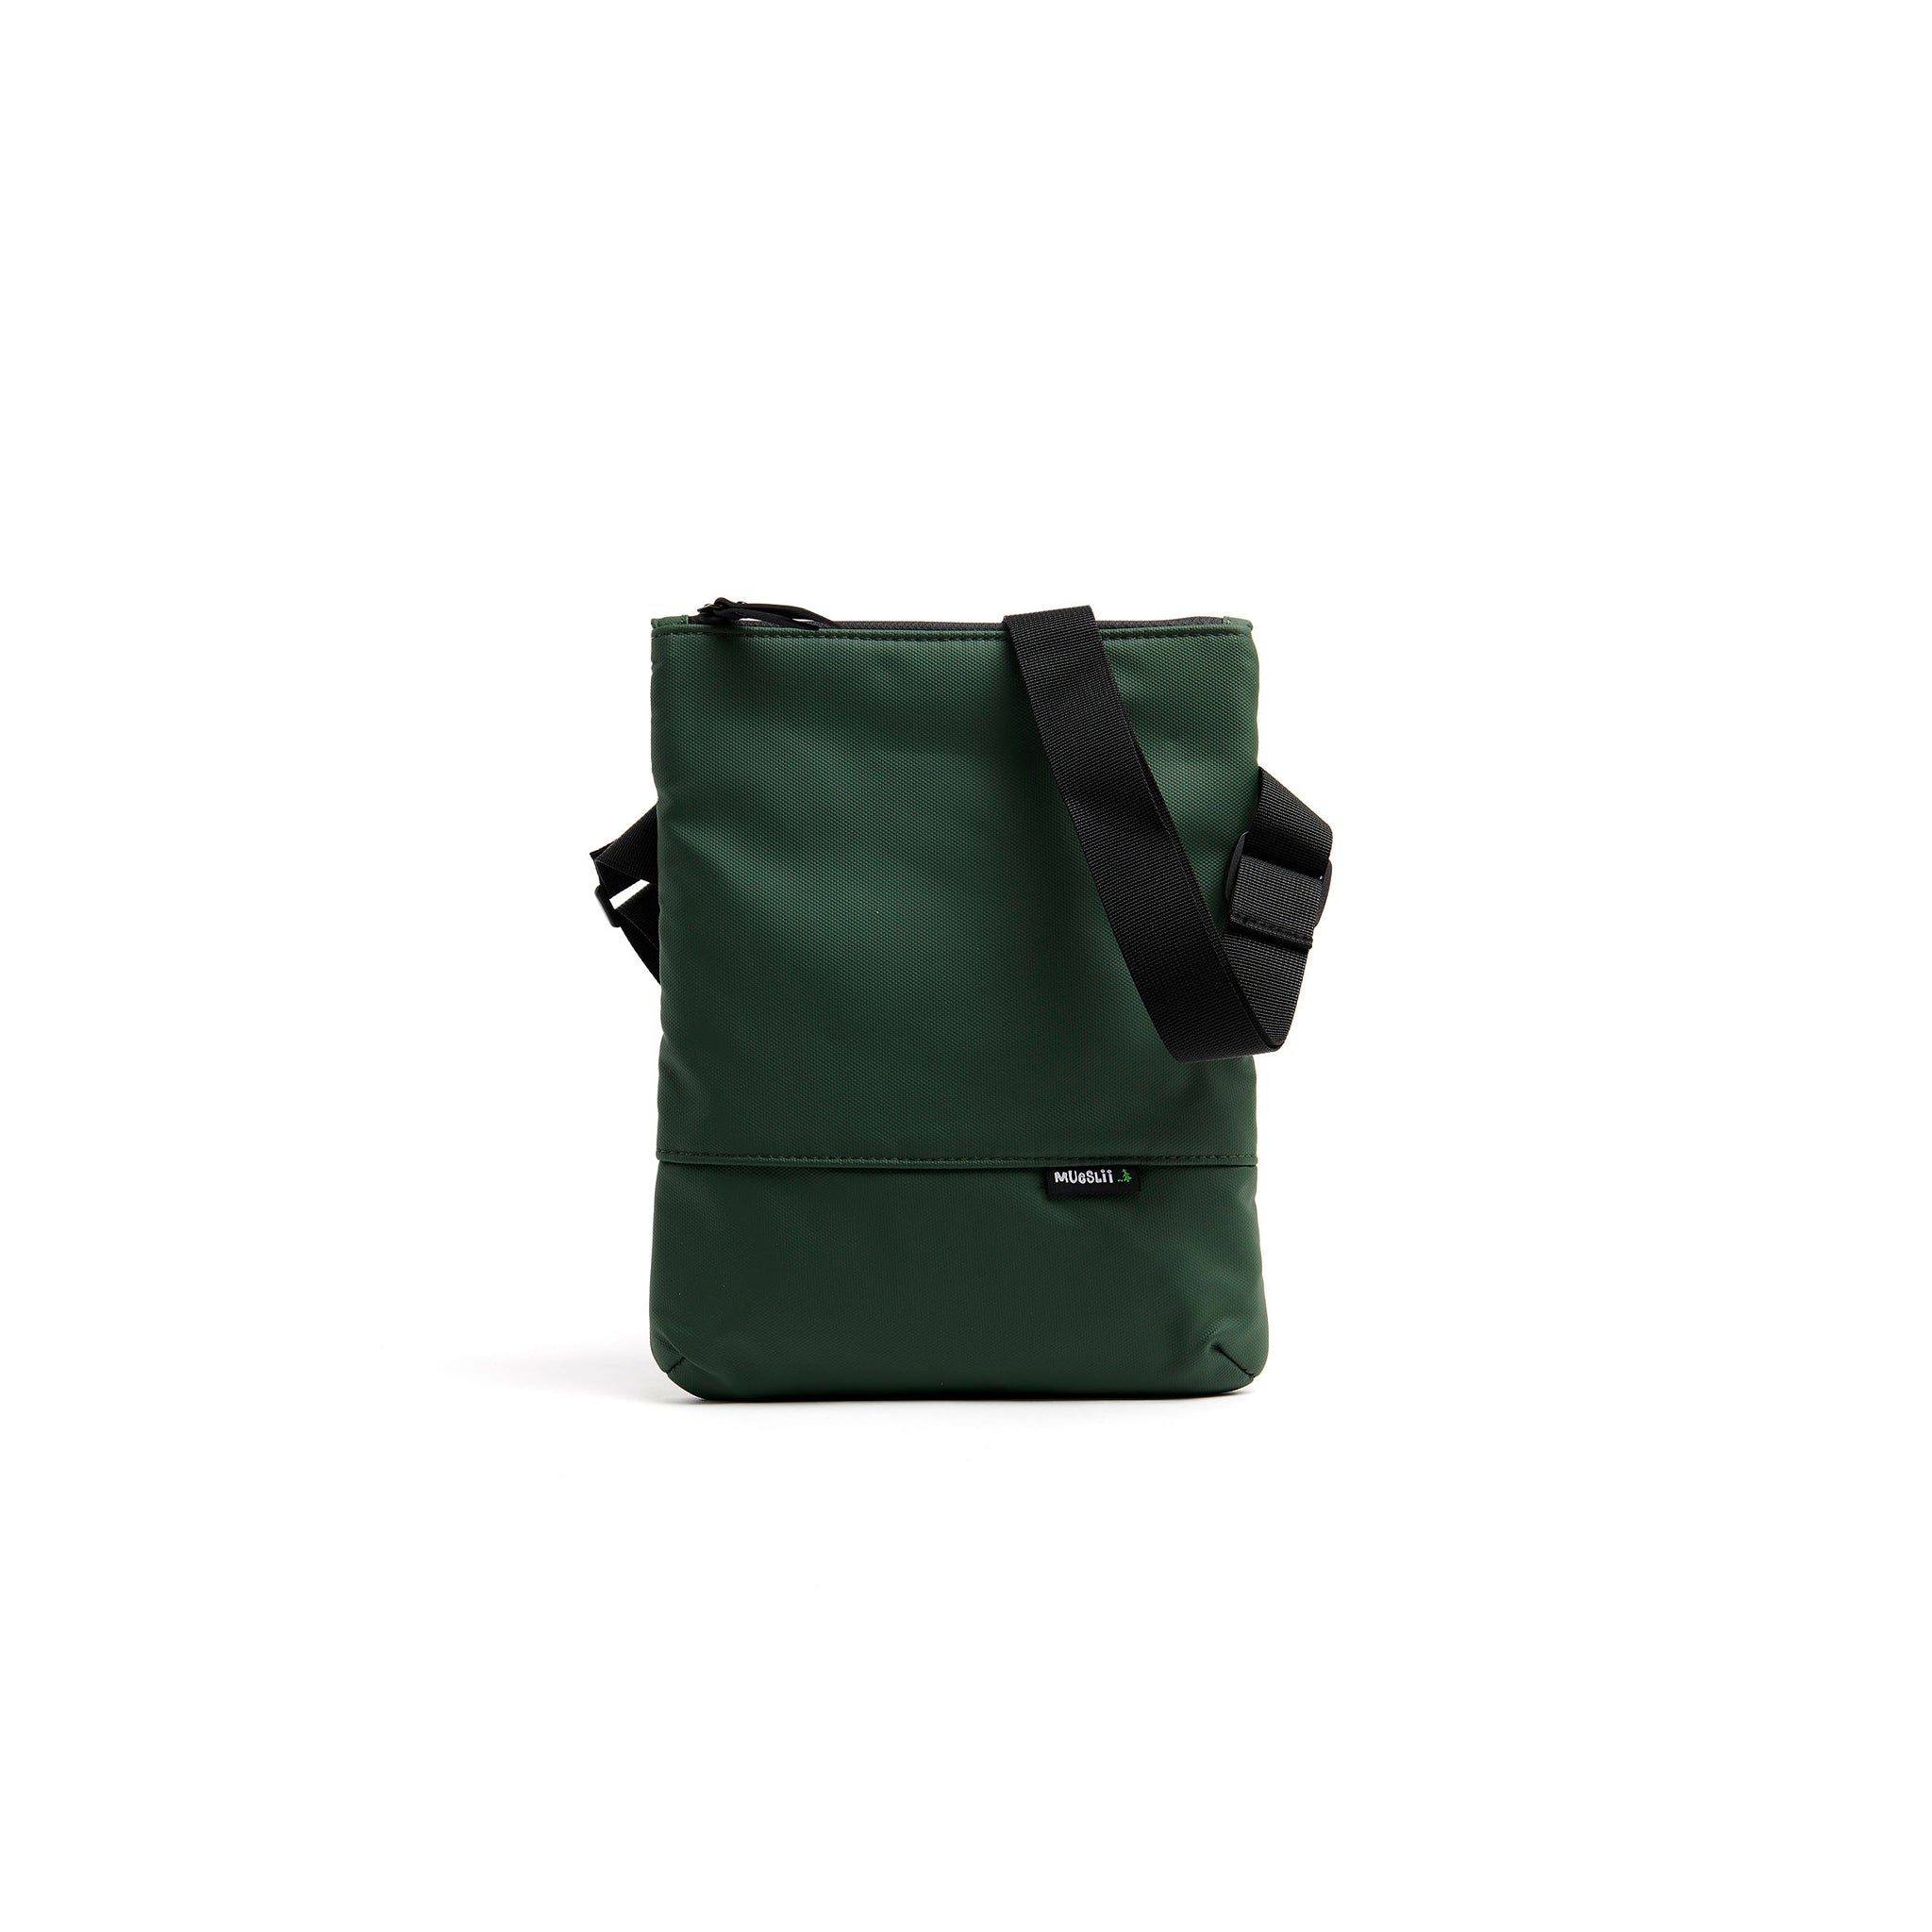 Mueslii crossbody, made of PU coated waterproof nylon, color  olive green, front view.